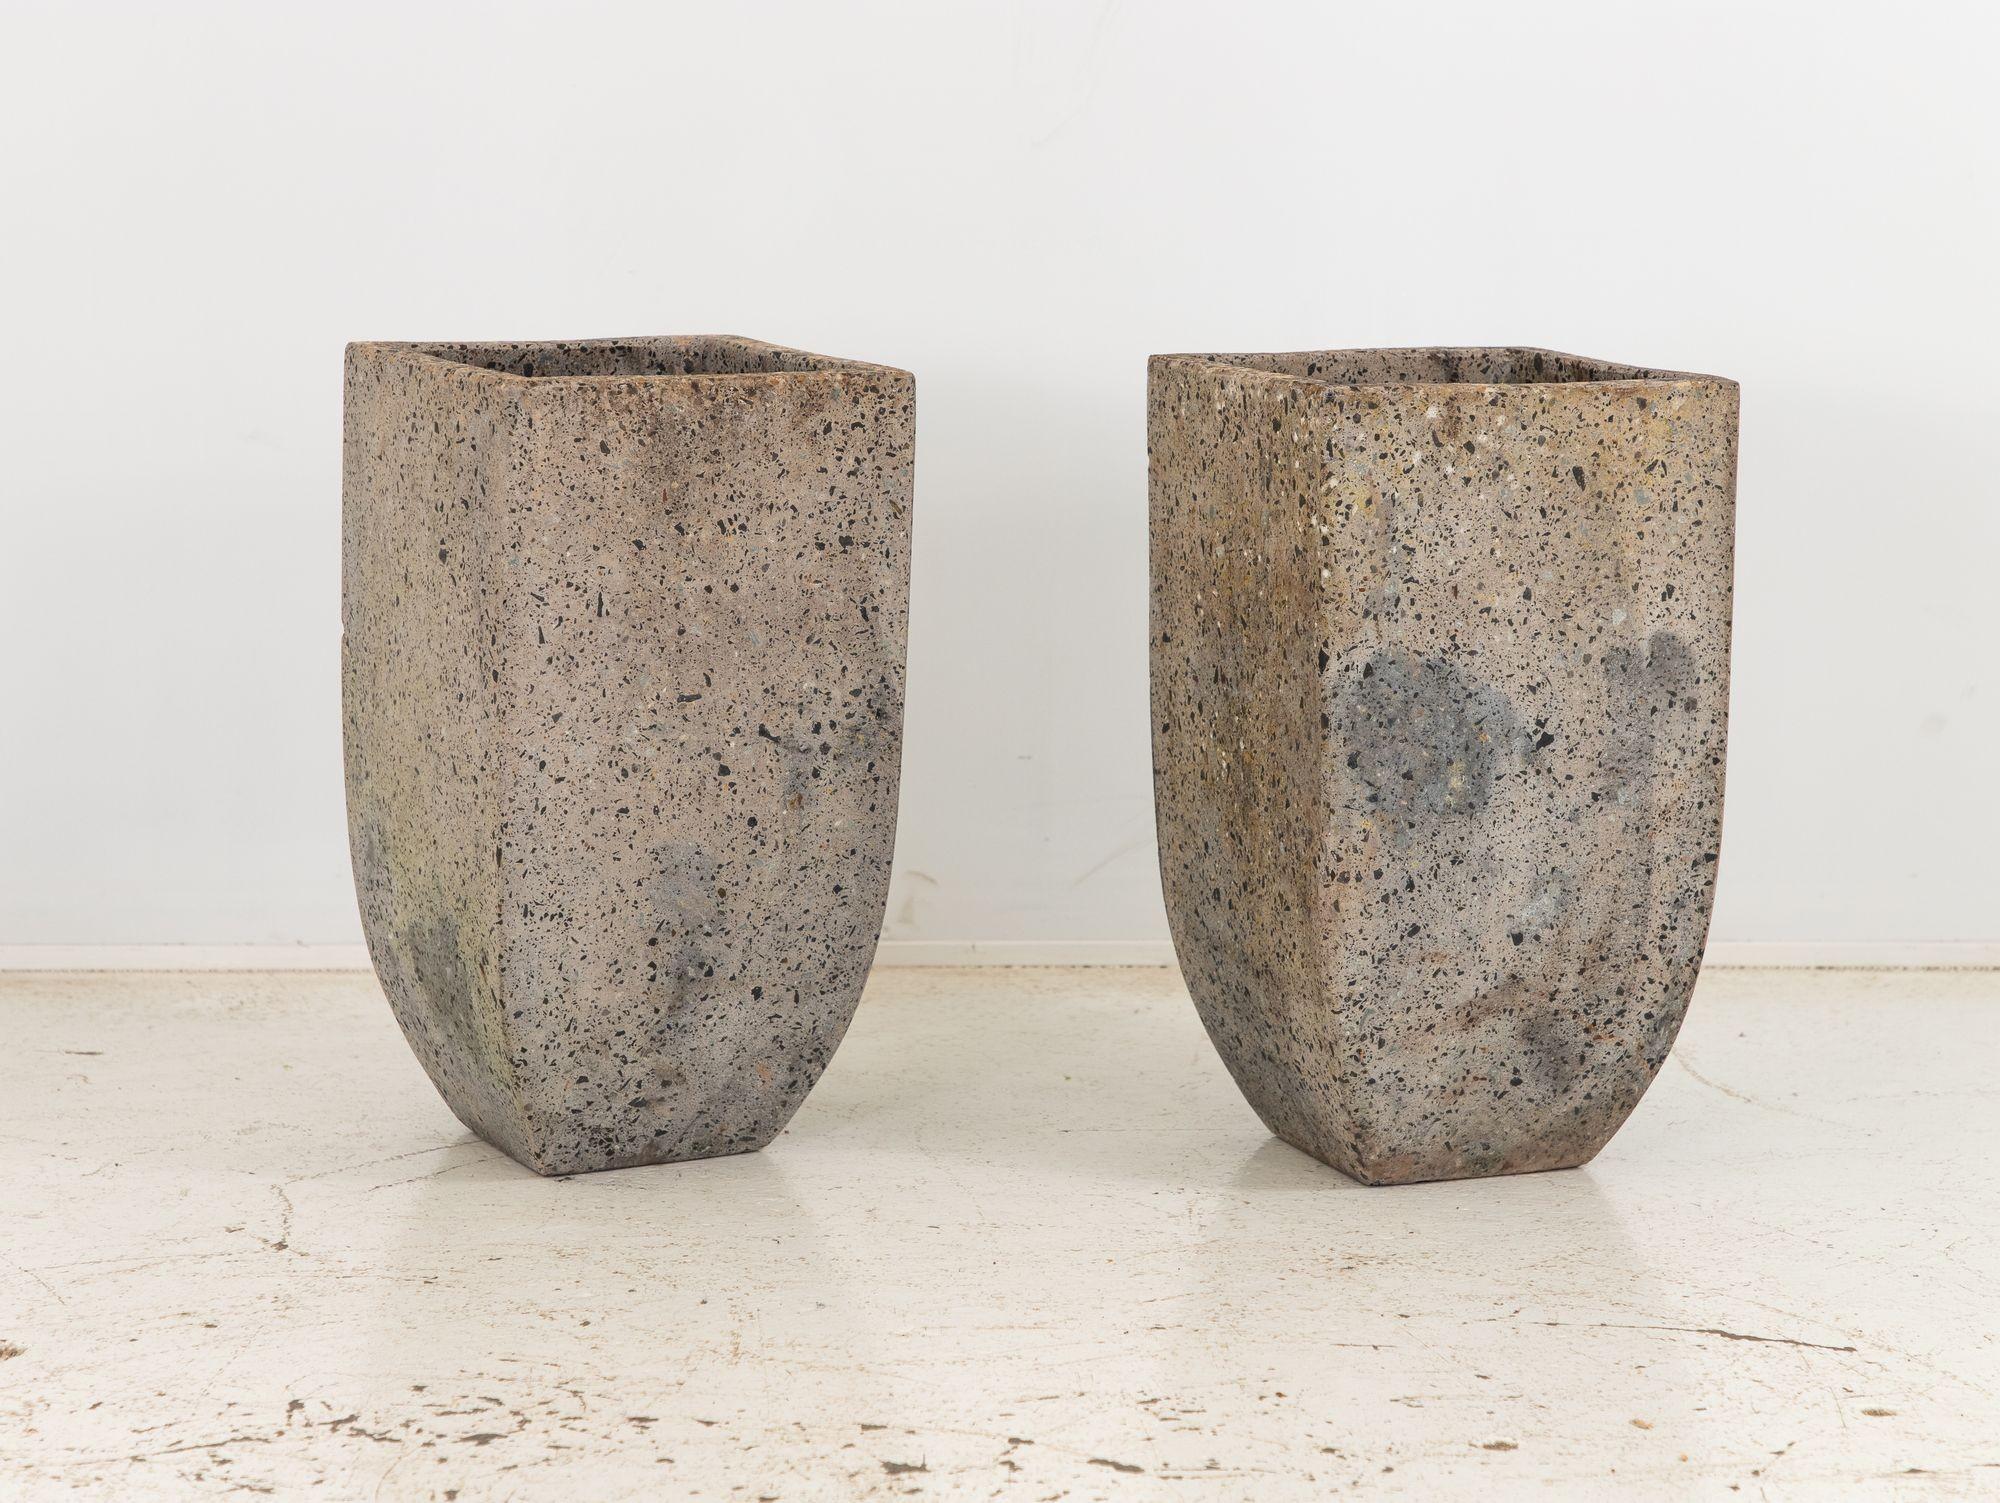 European Brutalist Inspired Pair of Mixed Stone Planters, 20th Century For Sale